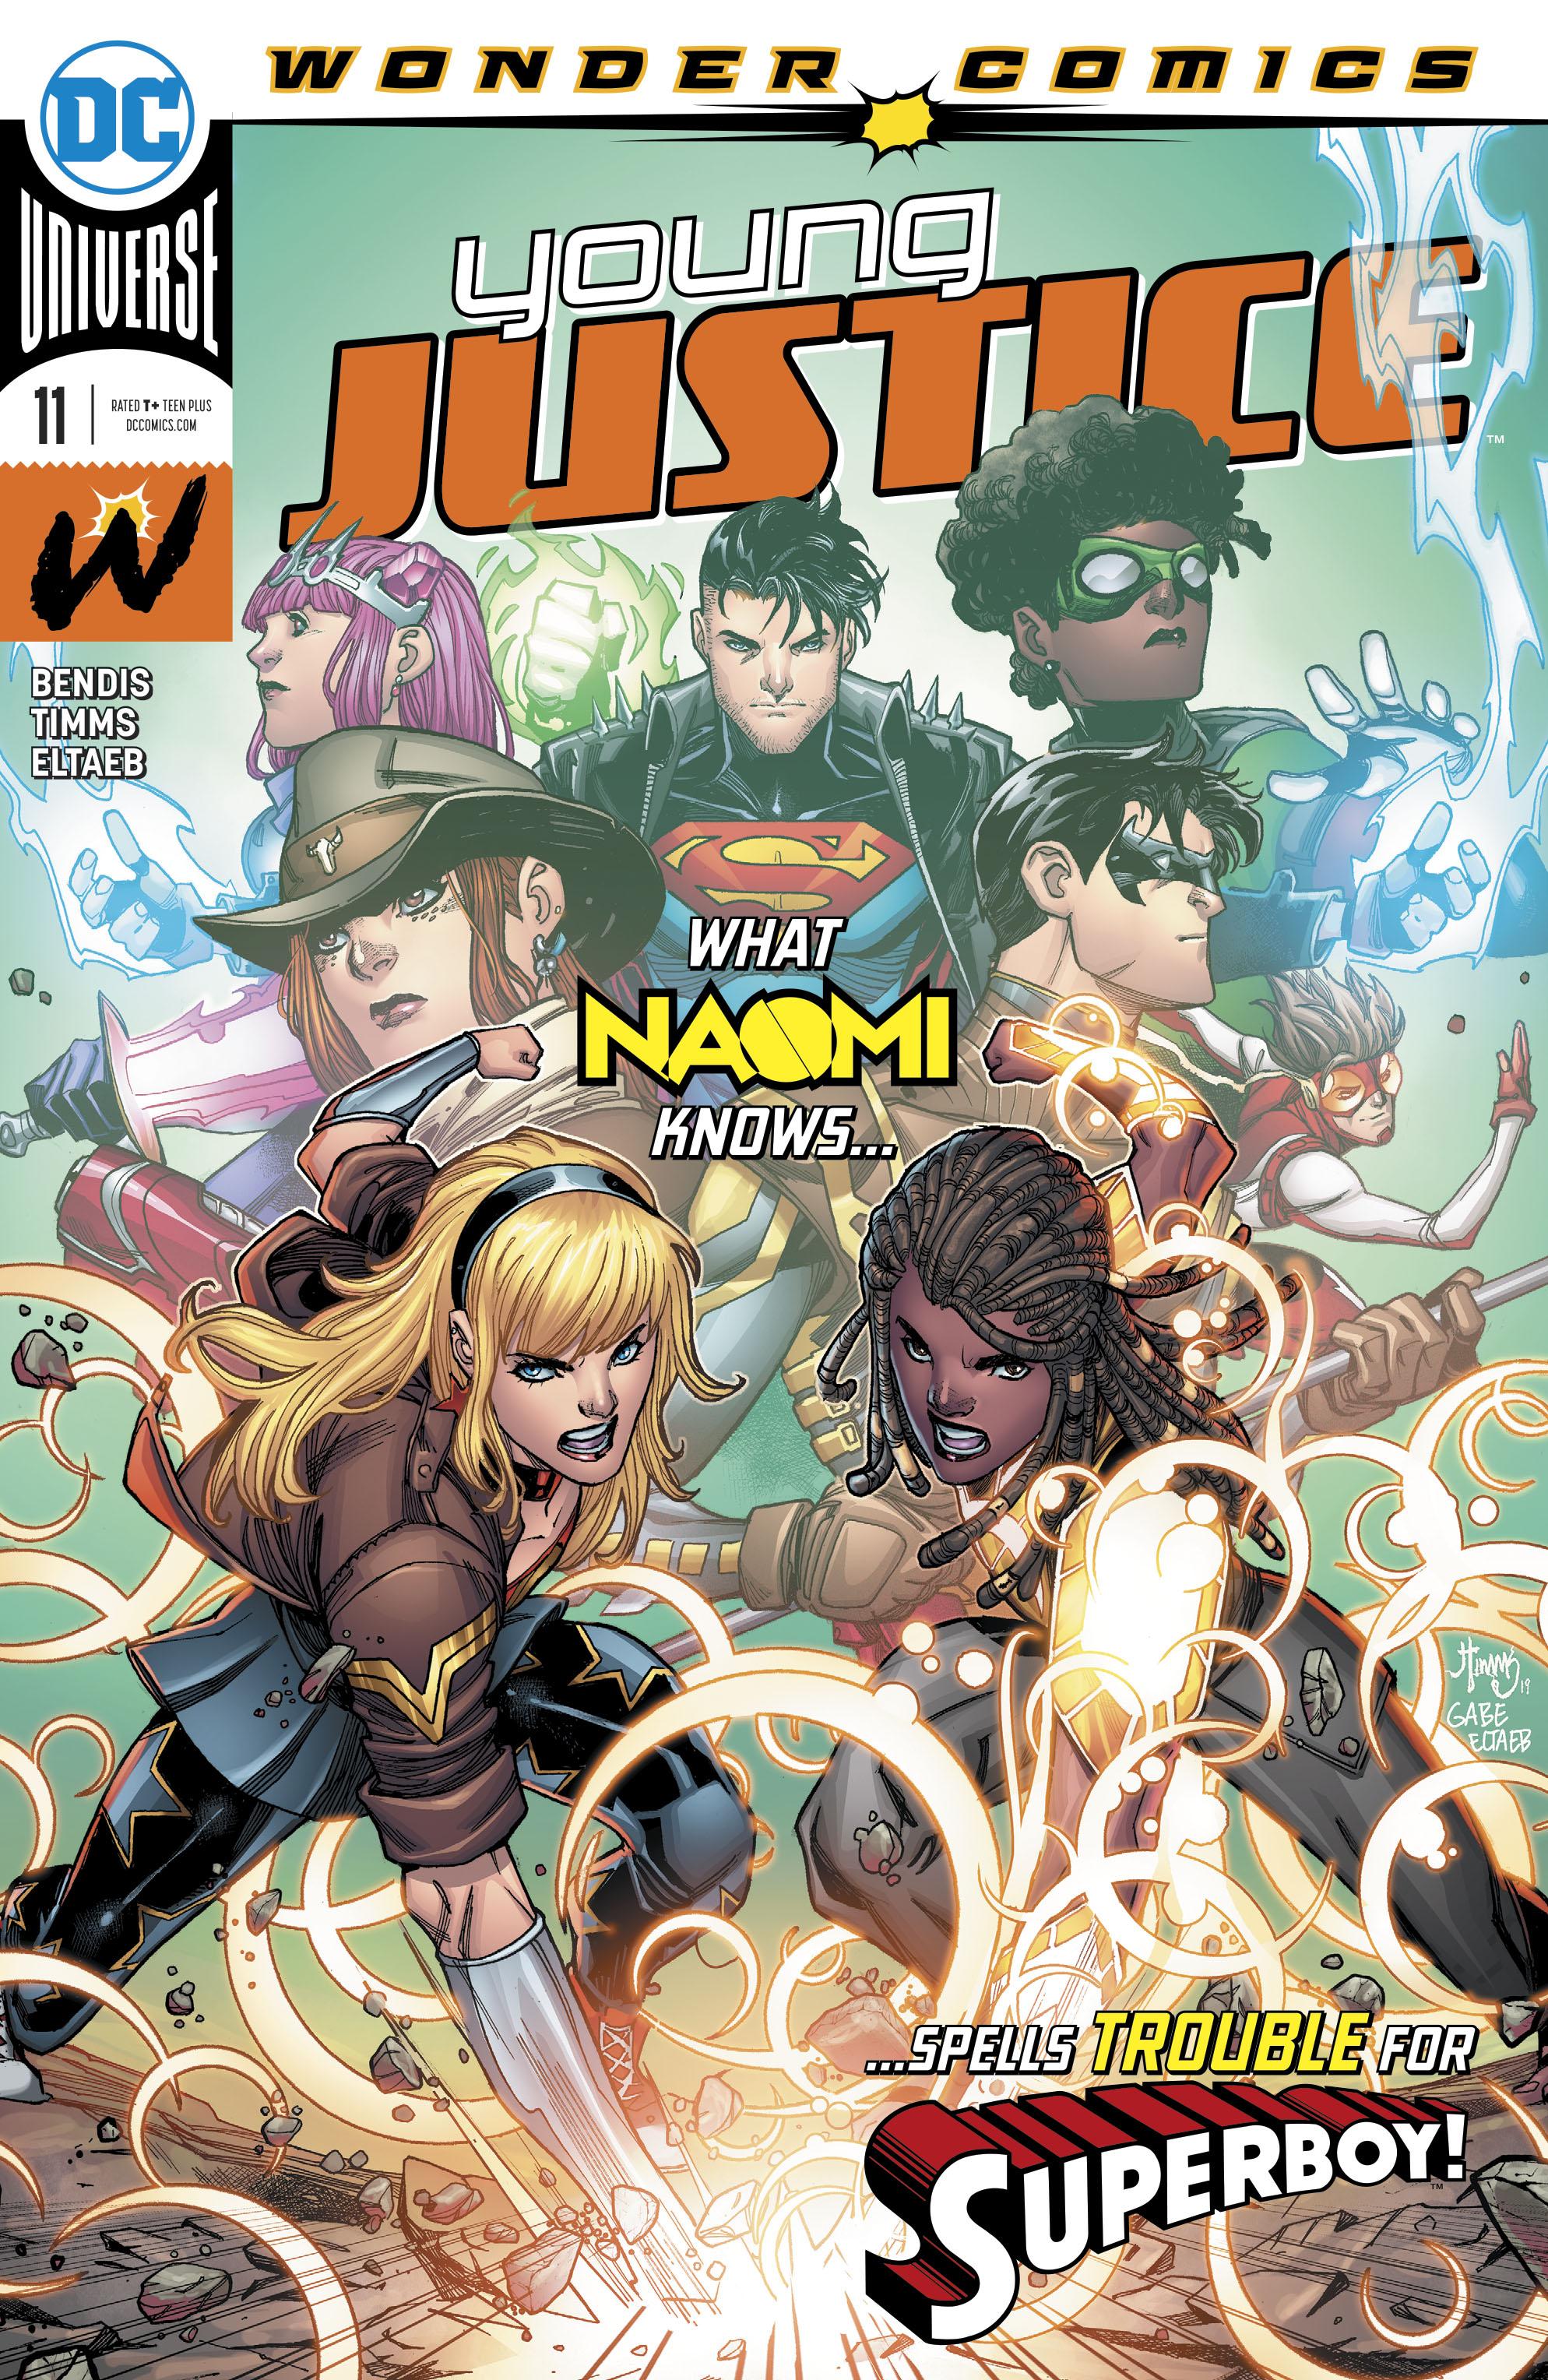 Young Justice Vol. 3 #11